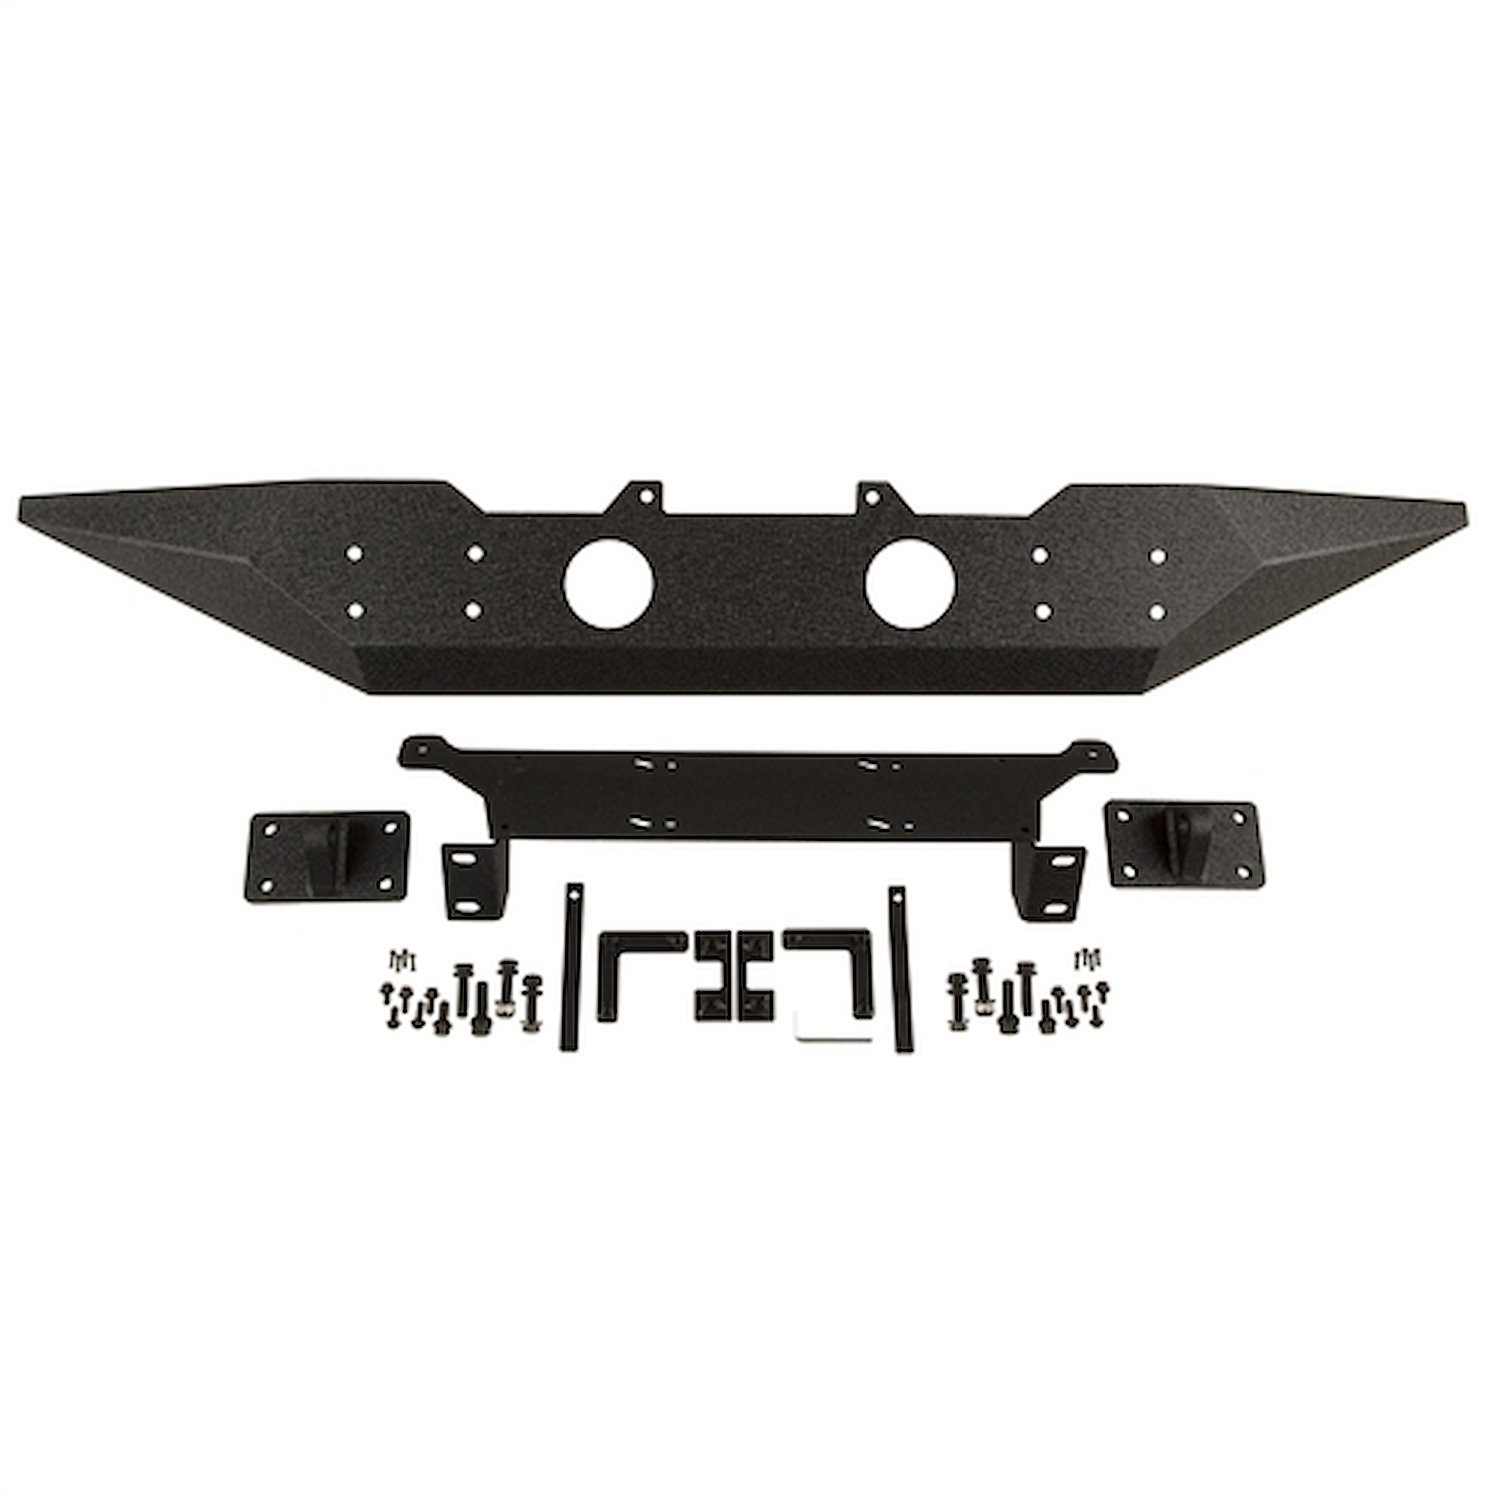 Spartan Front Bumper with Standard Ends for 2007-2018